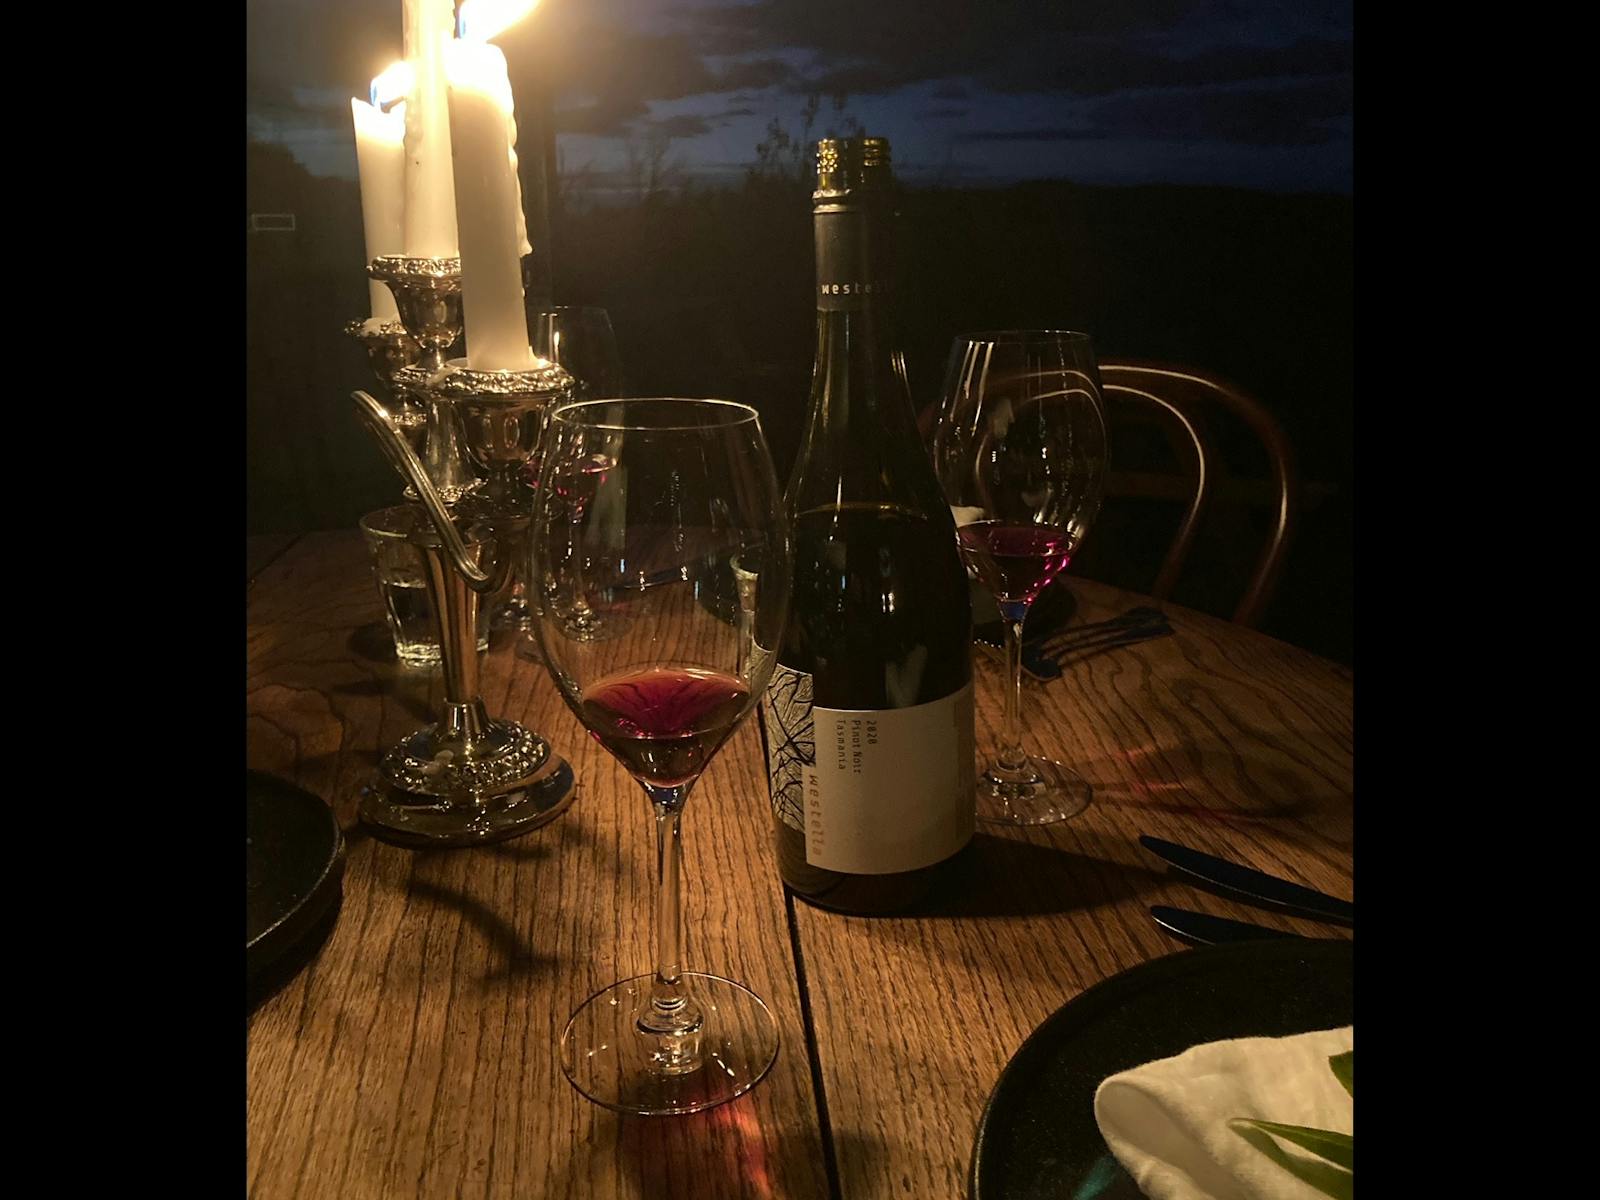 Westella Pinot Noir captured by candlelight for the Winter Solstice Dinner